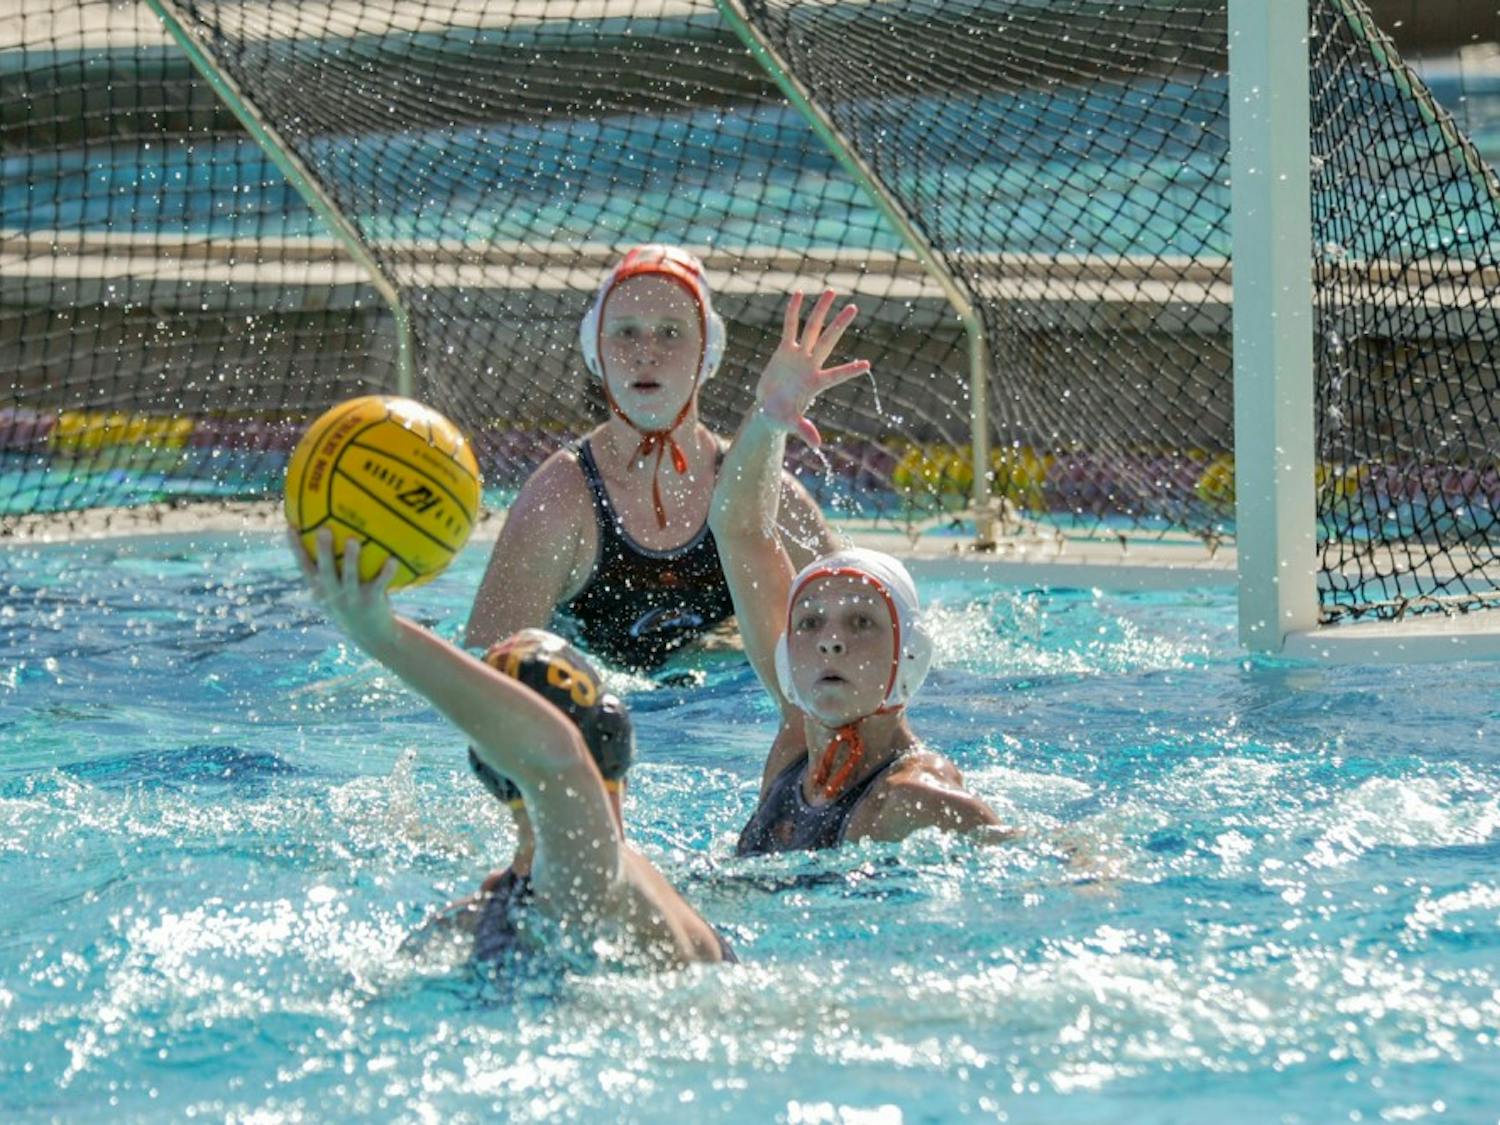 Freshman Maud Koopman takes a shot against&nbsp;the University of Pacific on Sunday, March 20, 2016 at the Mona Plummer Aquatic Complex in Tempe, AZ. ASU water polo won 5-3.